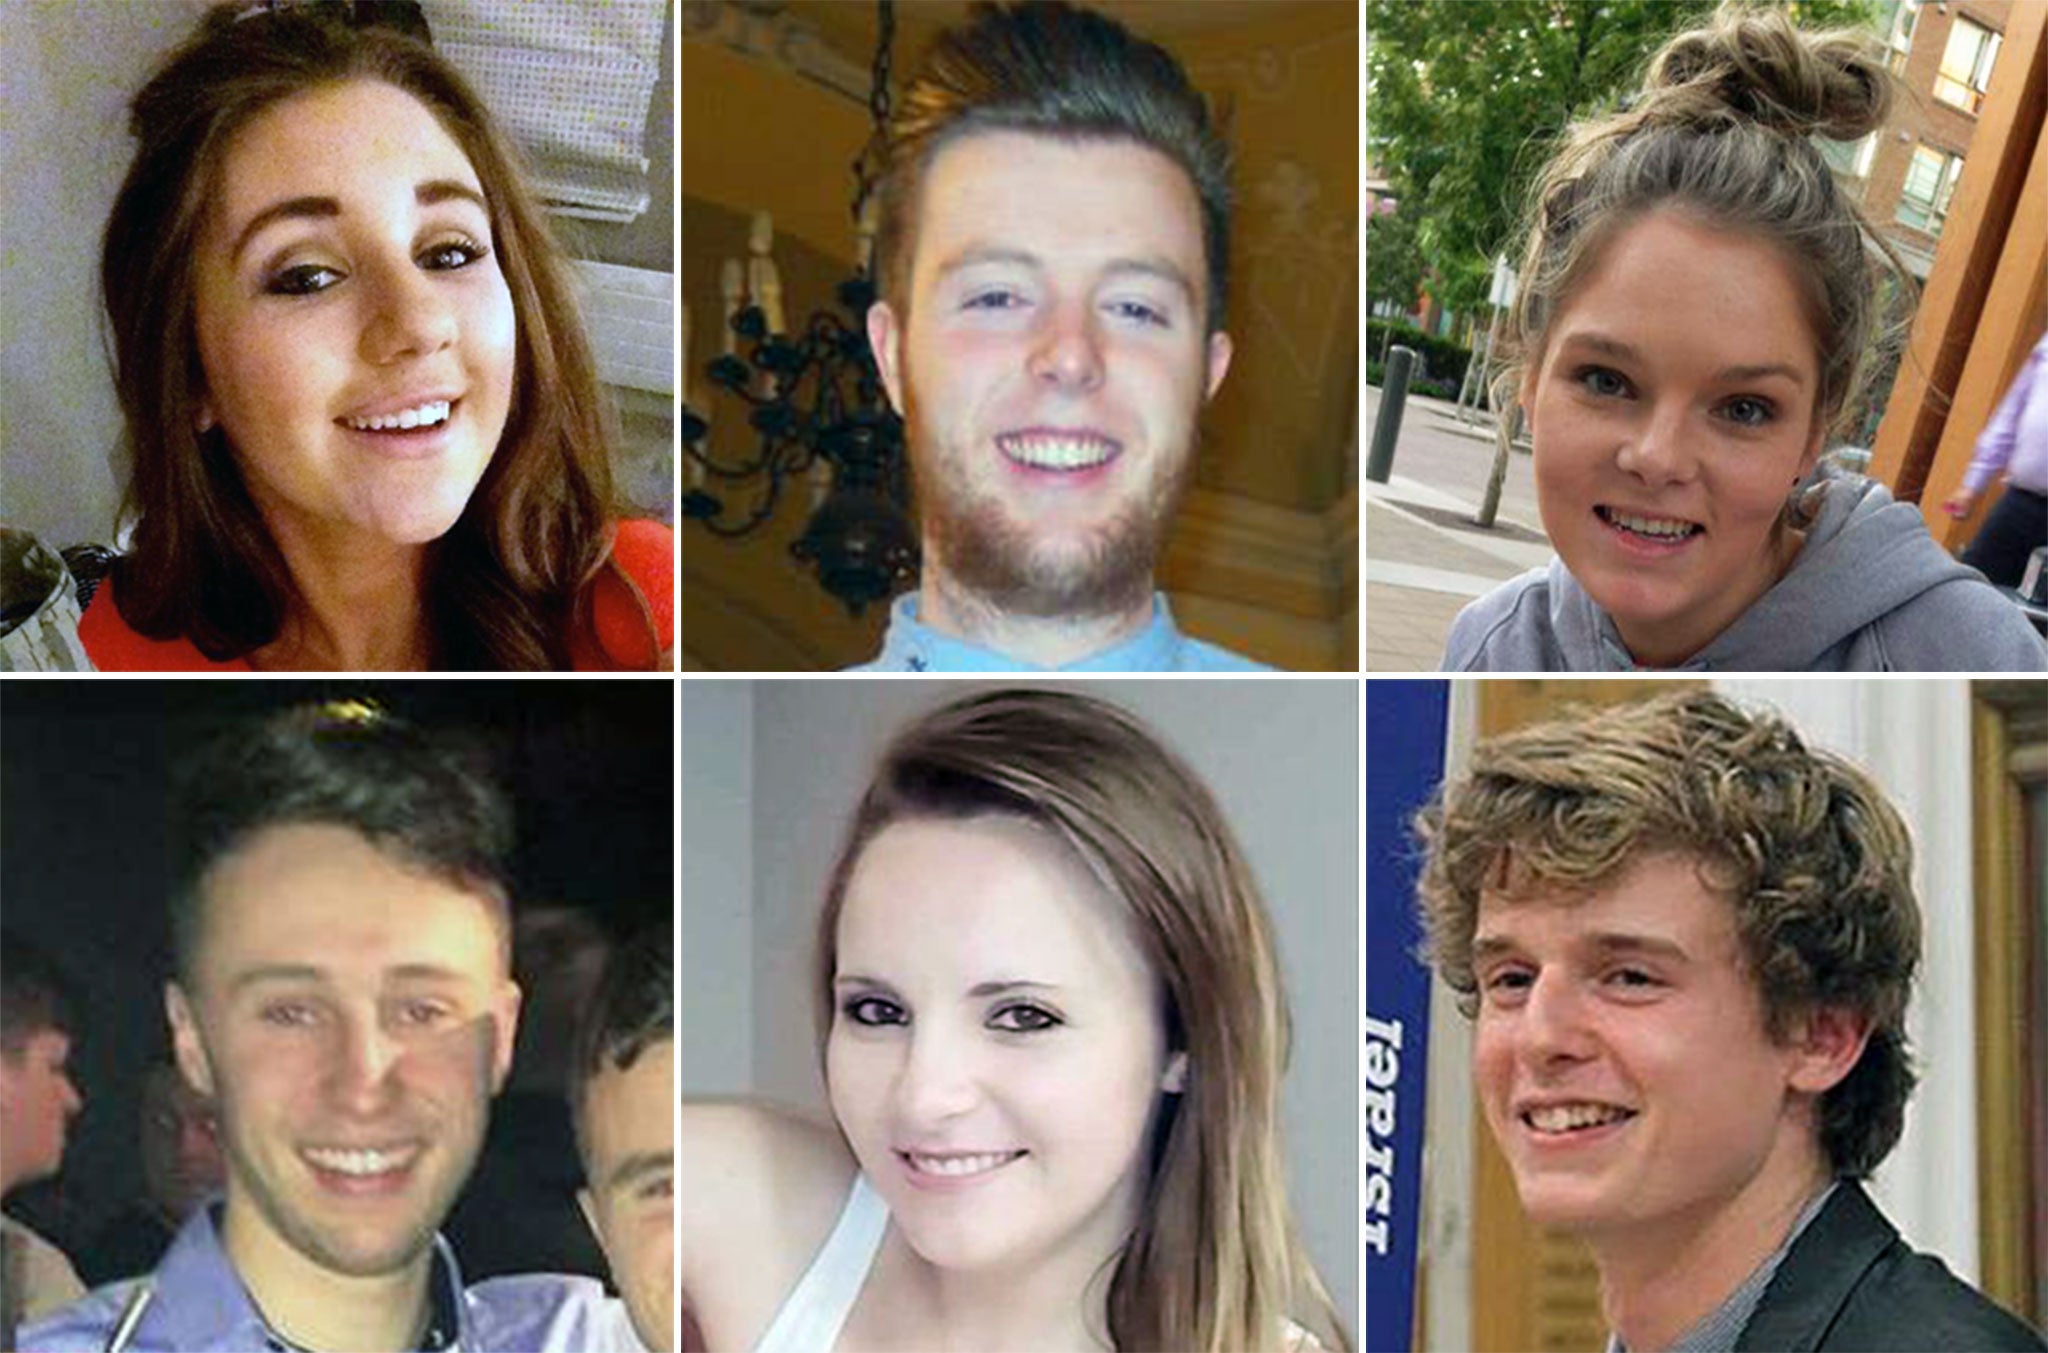 Eimear Walsh, 21, Eoghan Culligan, 21, Olivia Burke, 21, Niccolai Schuster, 21, Ashley Donohoe, 22, and Lorcan Miller, 21, all died